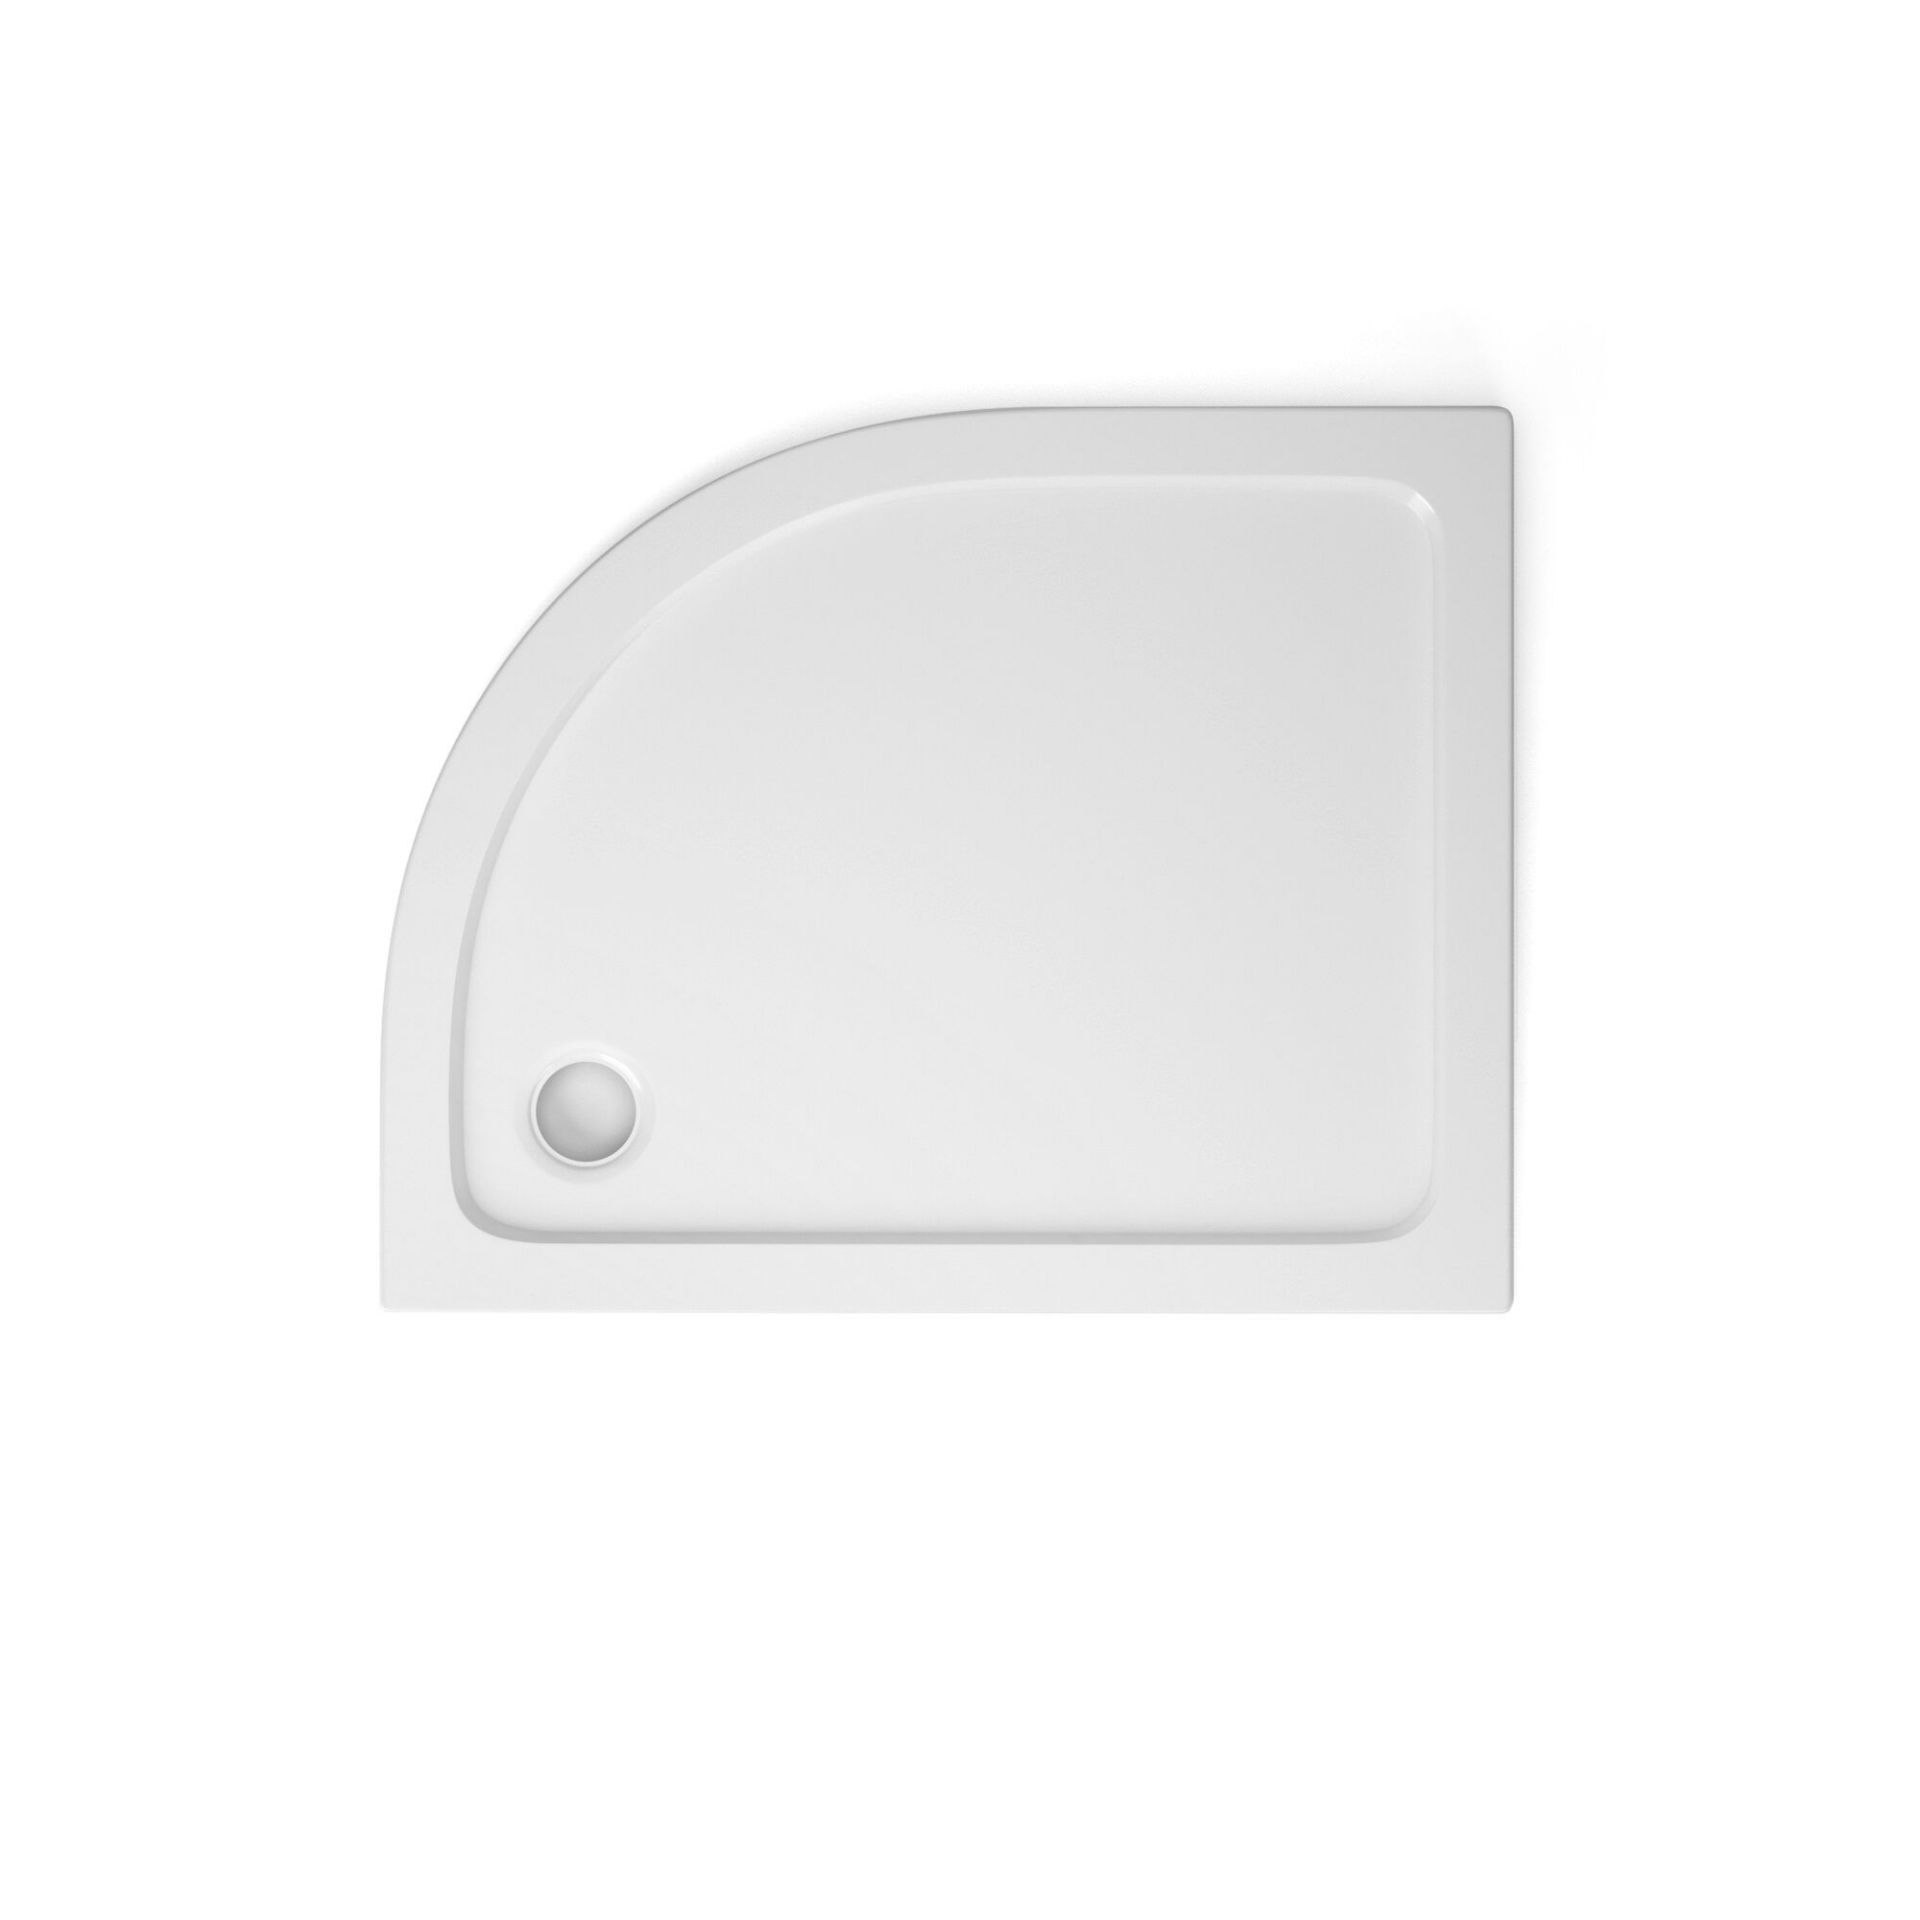 (QW62) 1000x800mm Offset Quadrant Ultra Slim Shower Tray - Right. Constructed from acrylic